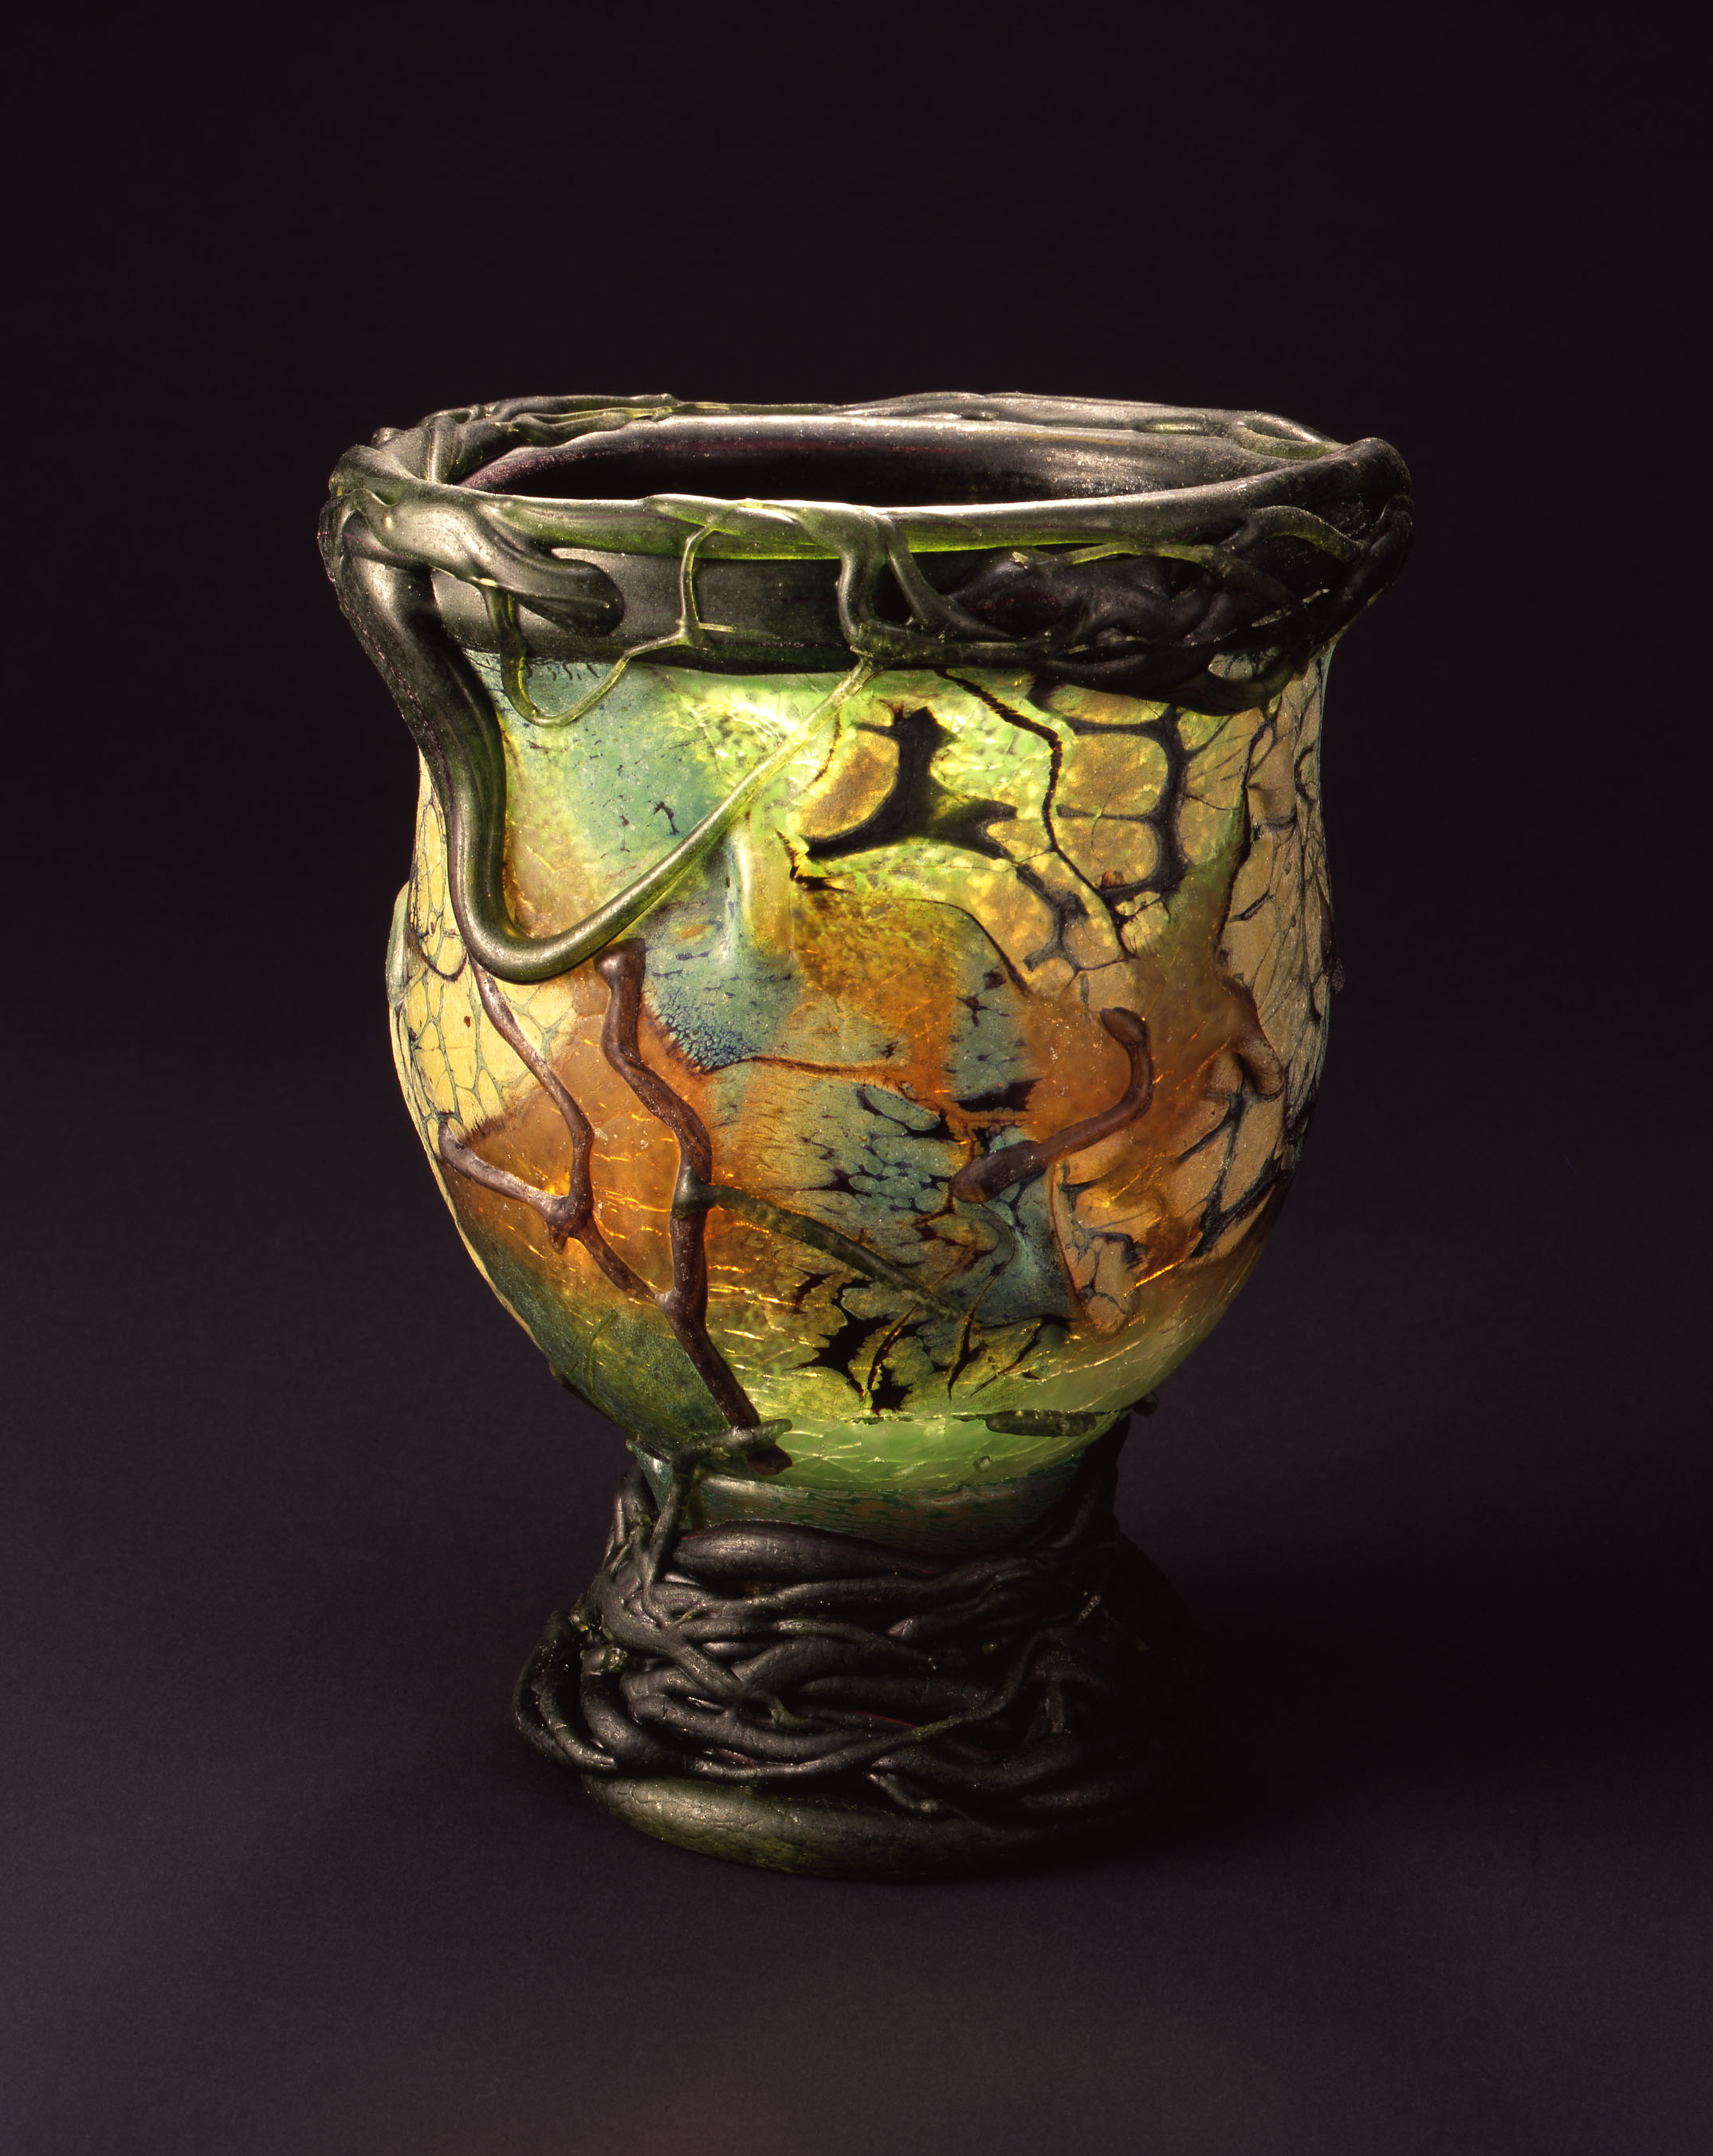  William Morris,&nbsp; Footed Dragonfly Bowl  &nbsp; (2004, glass, 9 3/4 x 7 5/8 x 8 inches), WM.51 